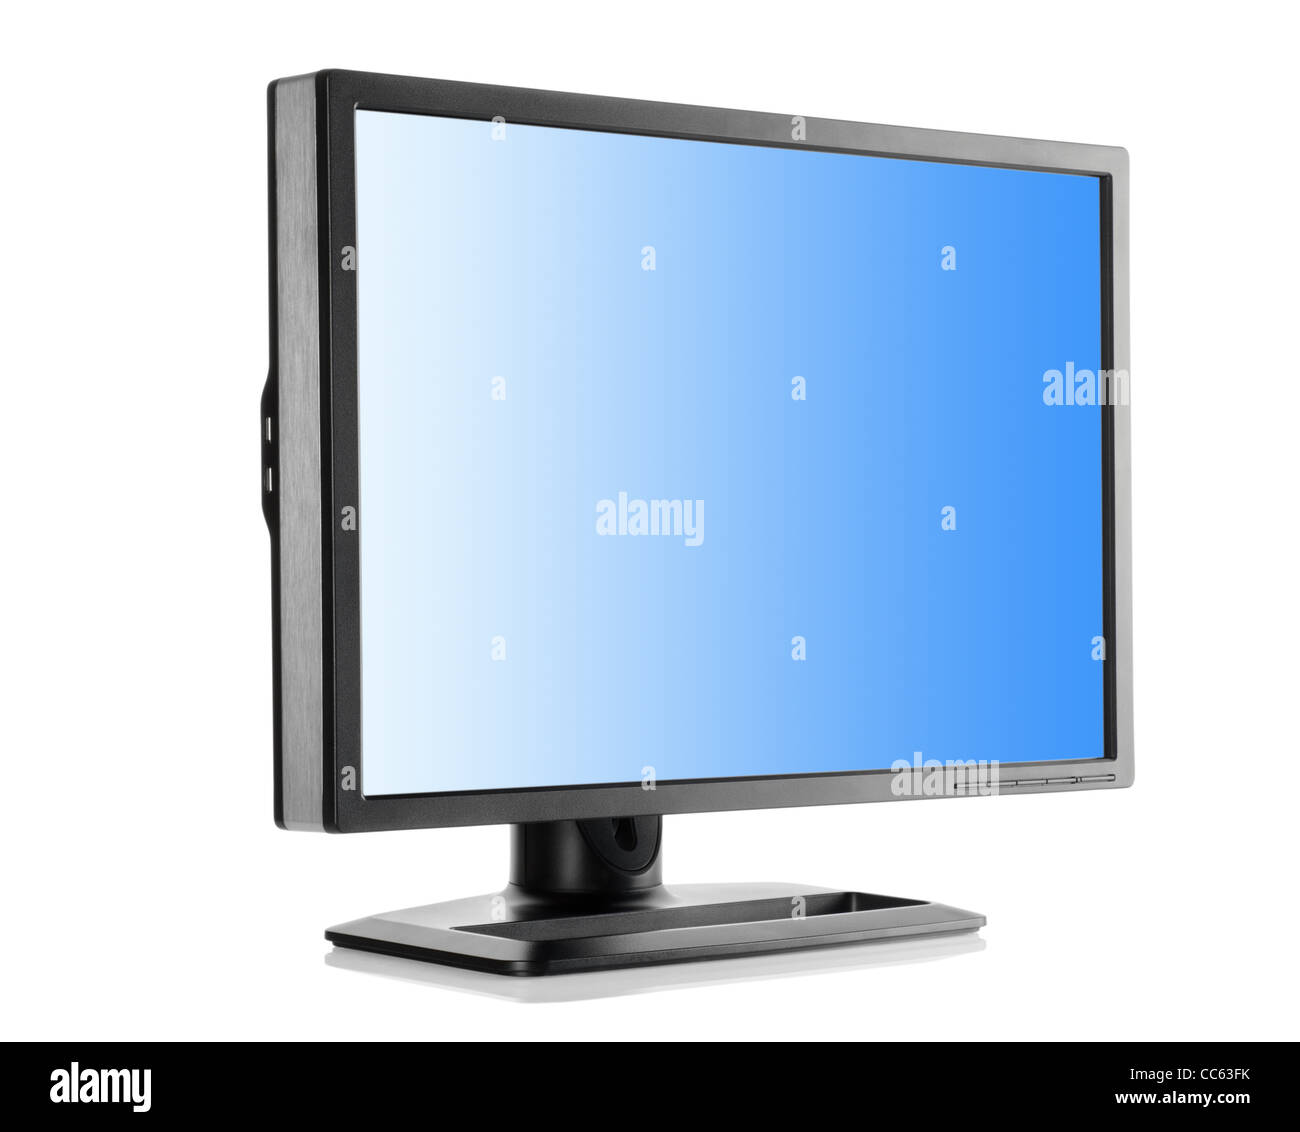 Liquid-crystal monitor isolated on a white background Stock Photo